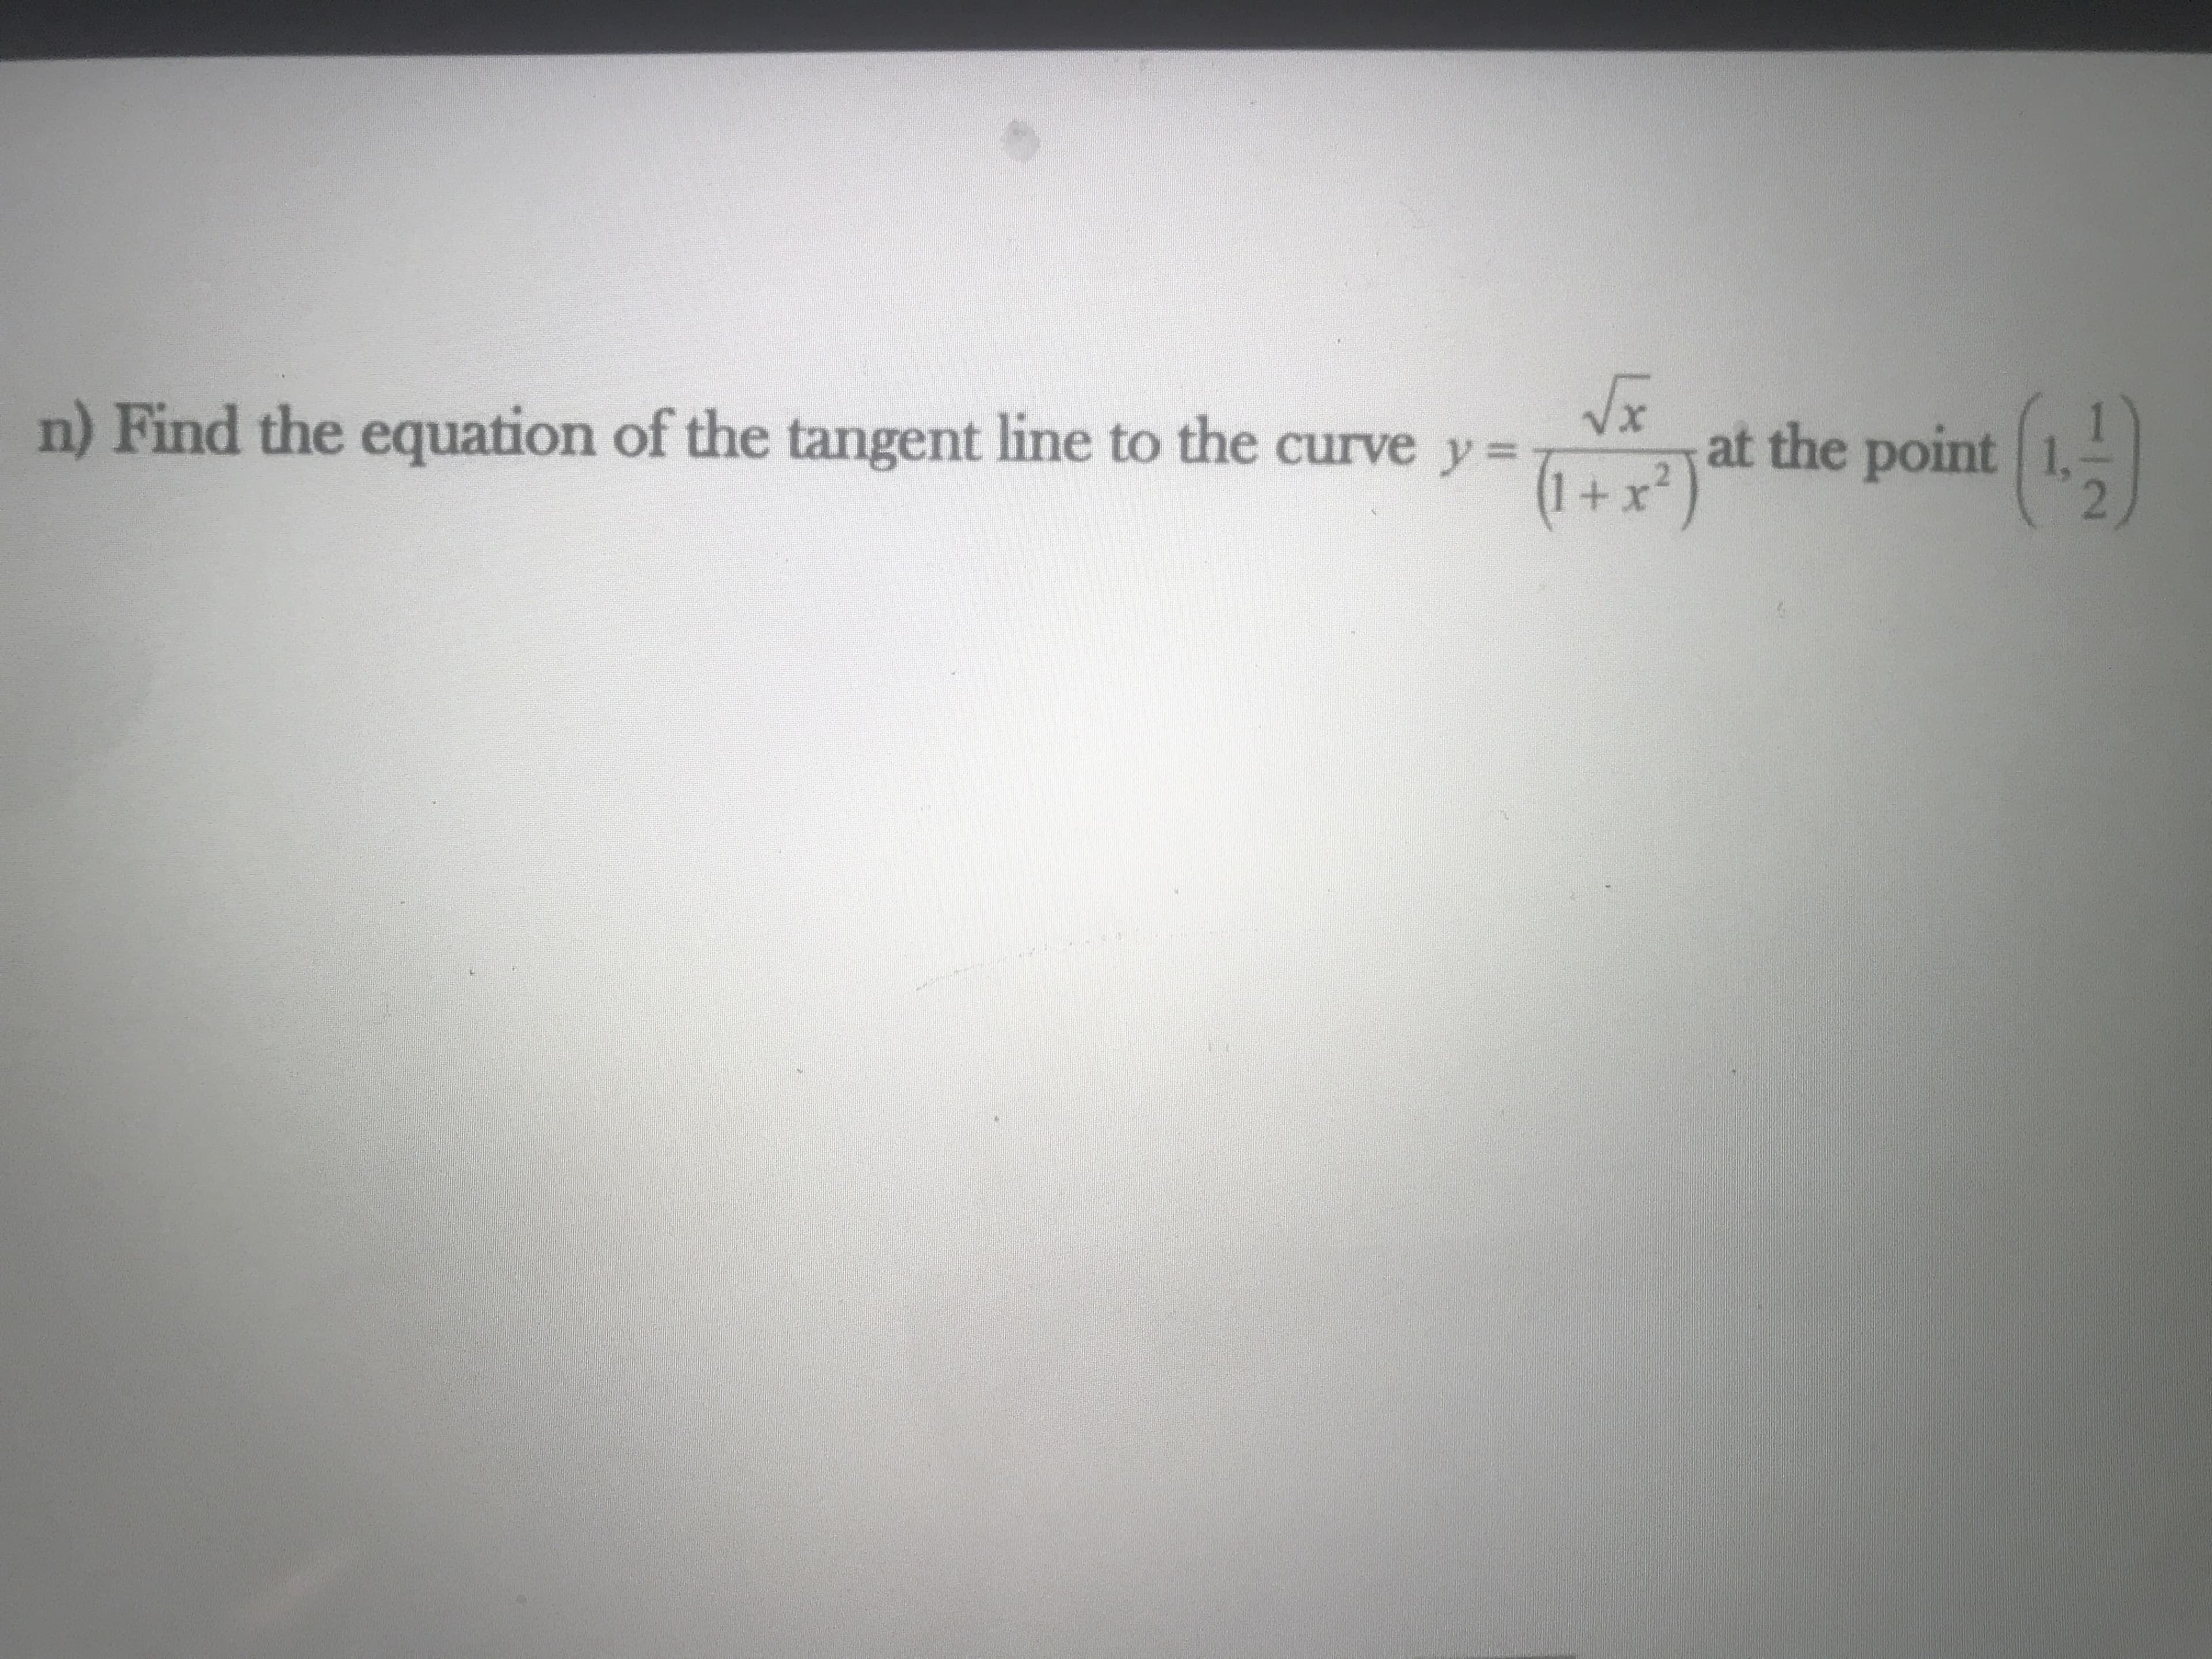 n) Find the equation of the tangent line to the curve y =
(1 + x*) at the point | 1,
%3D
